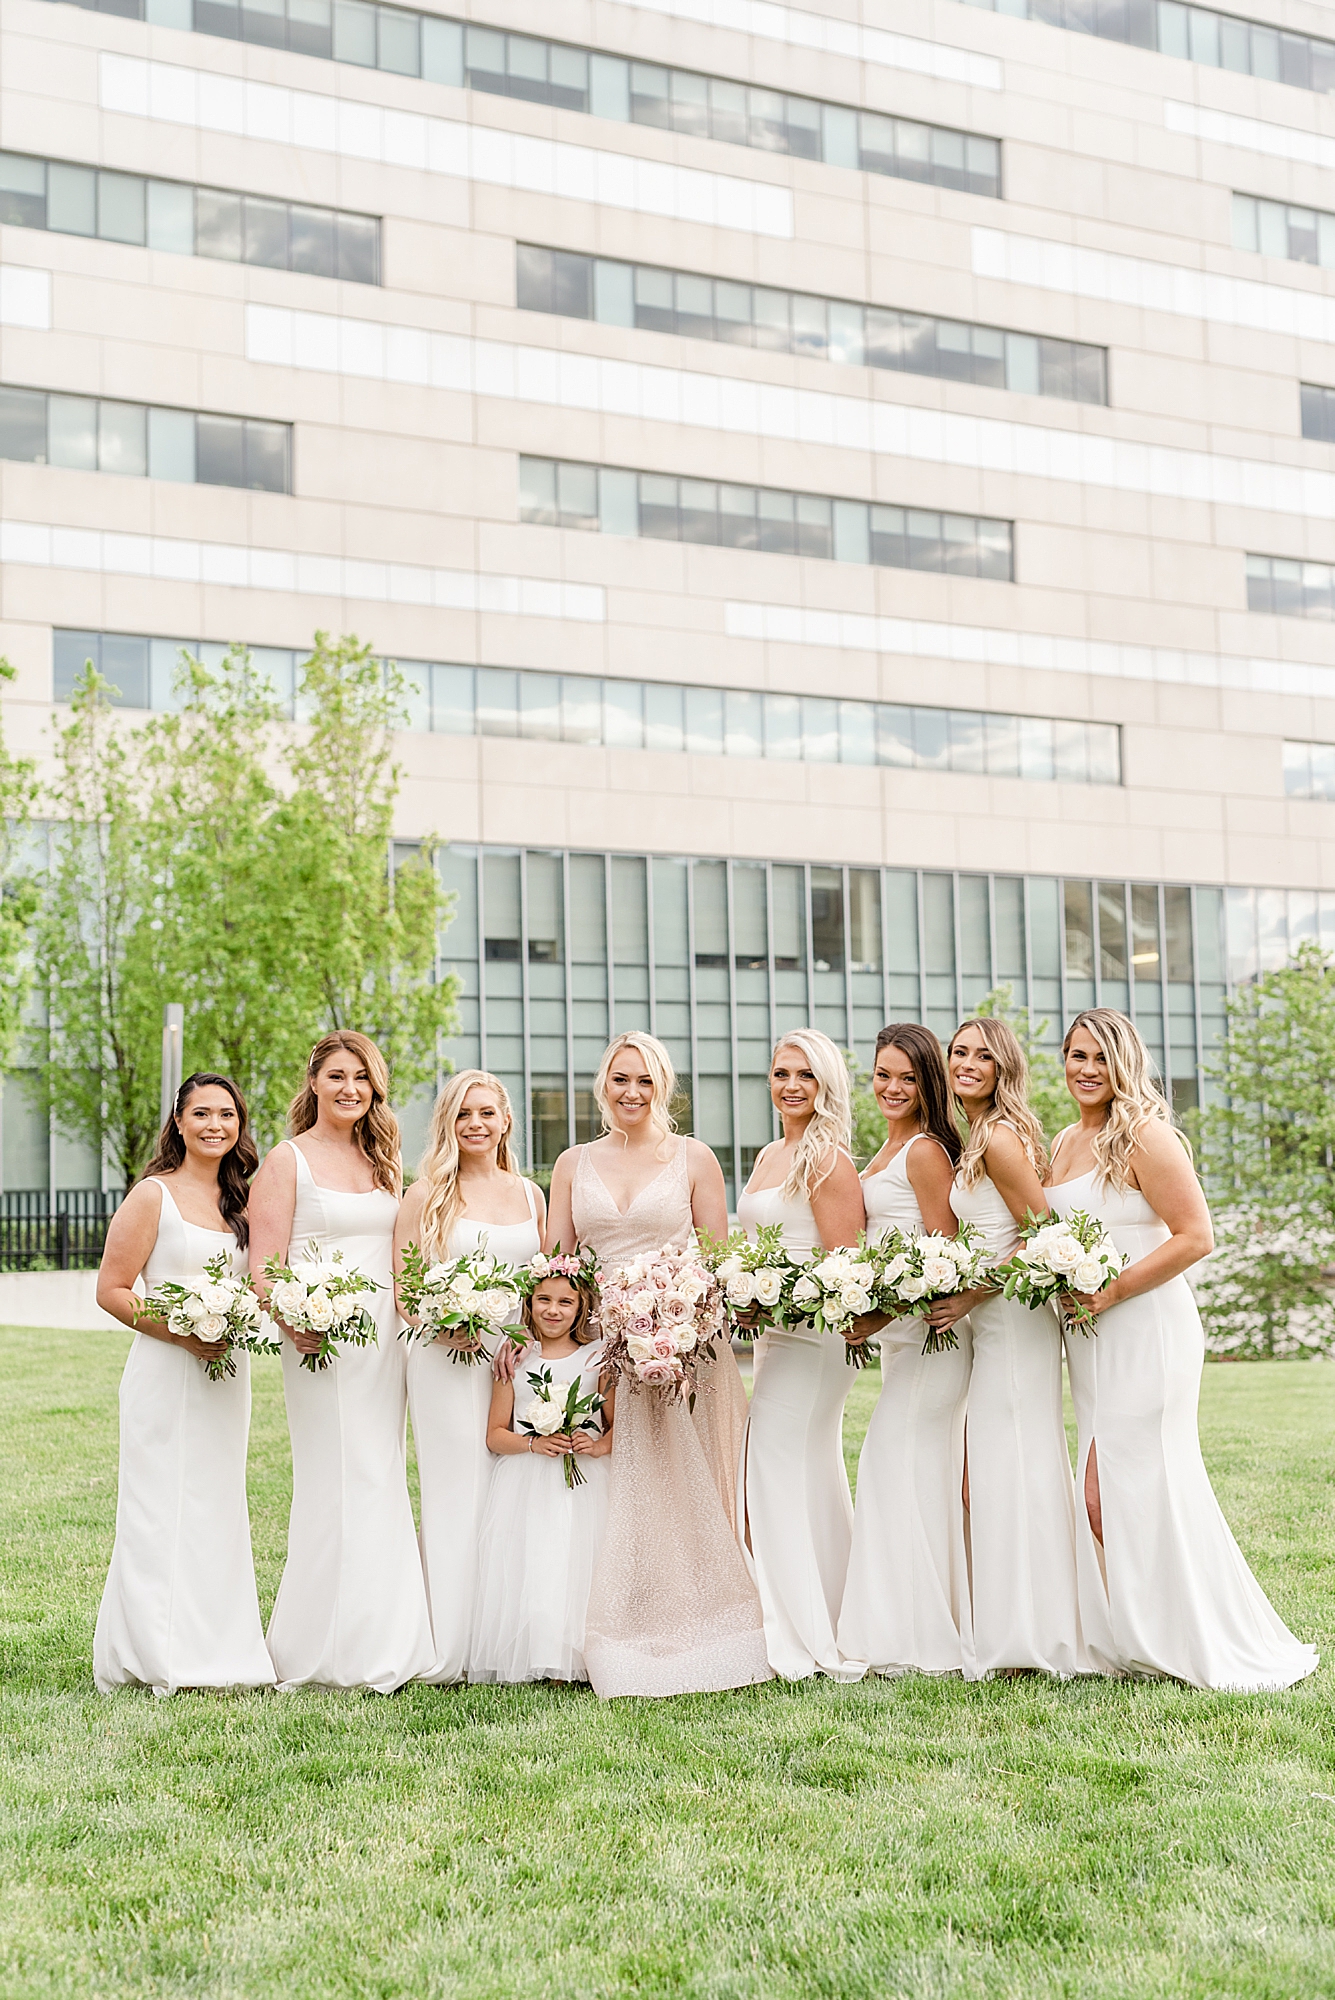 Westin Southern Columbus wedding portraits of bride and bridesmaids in white dresses